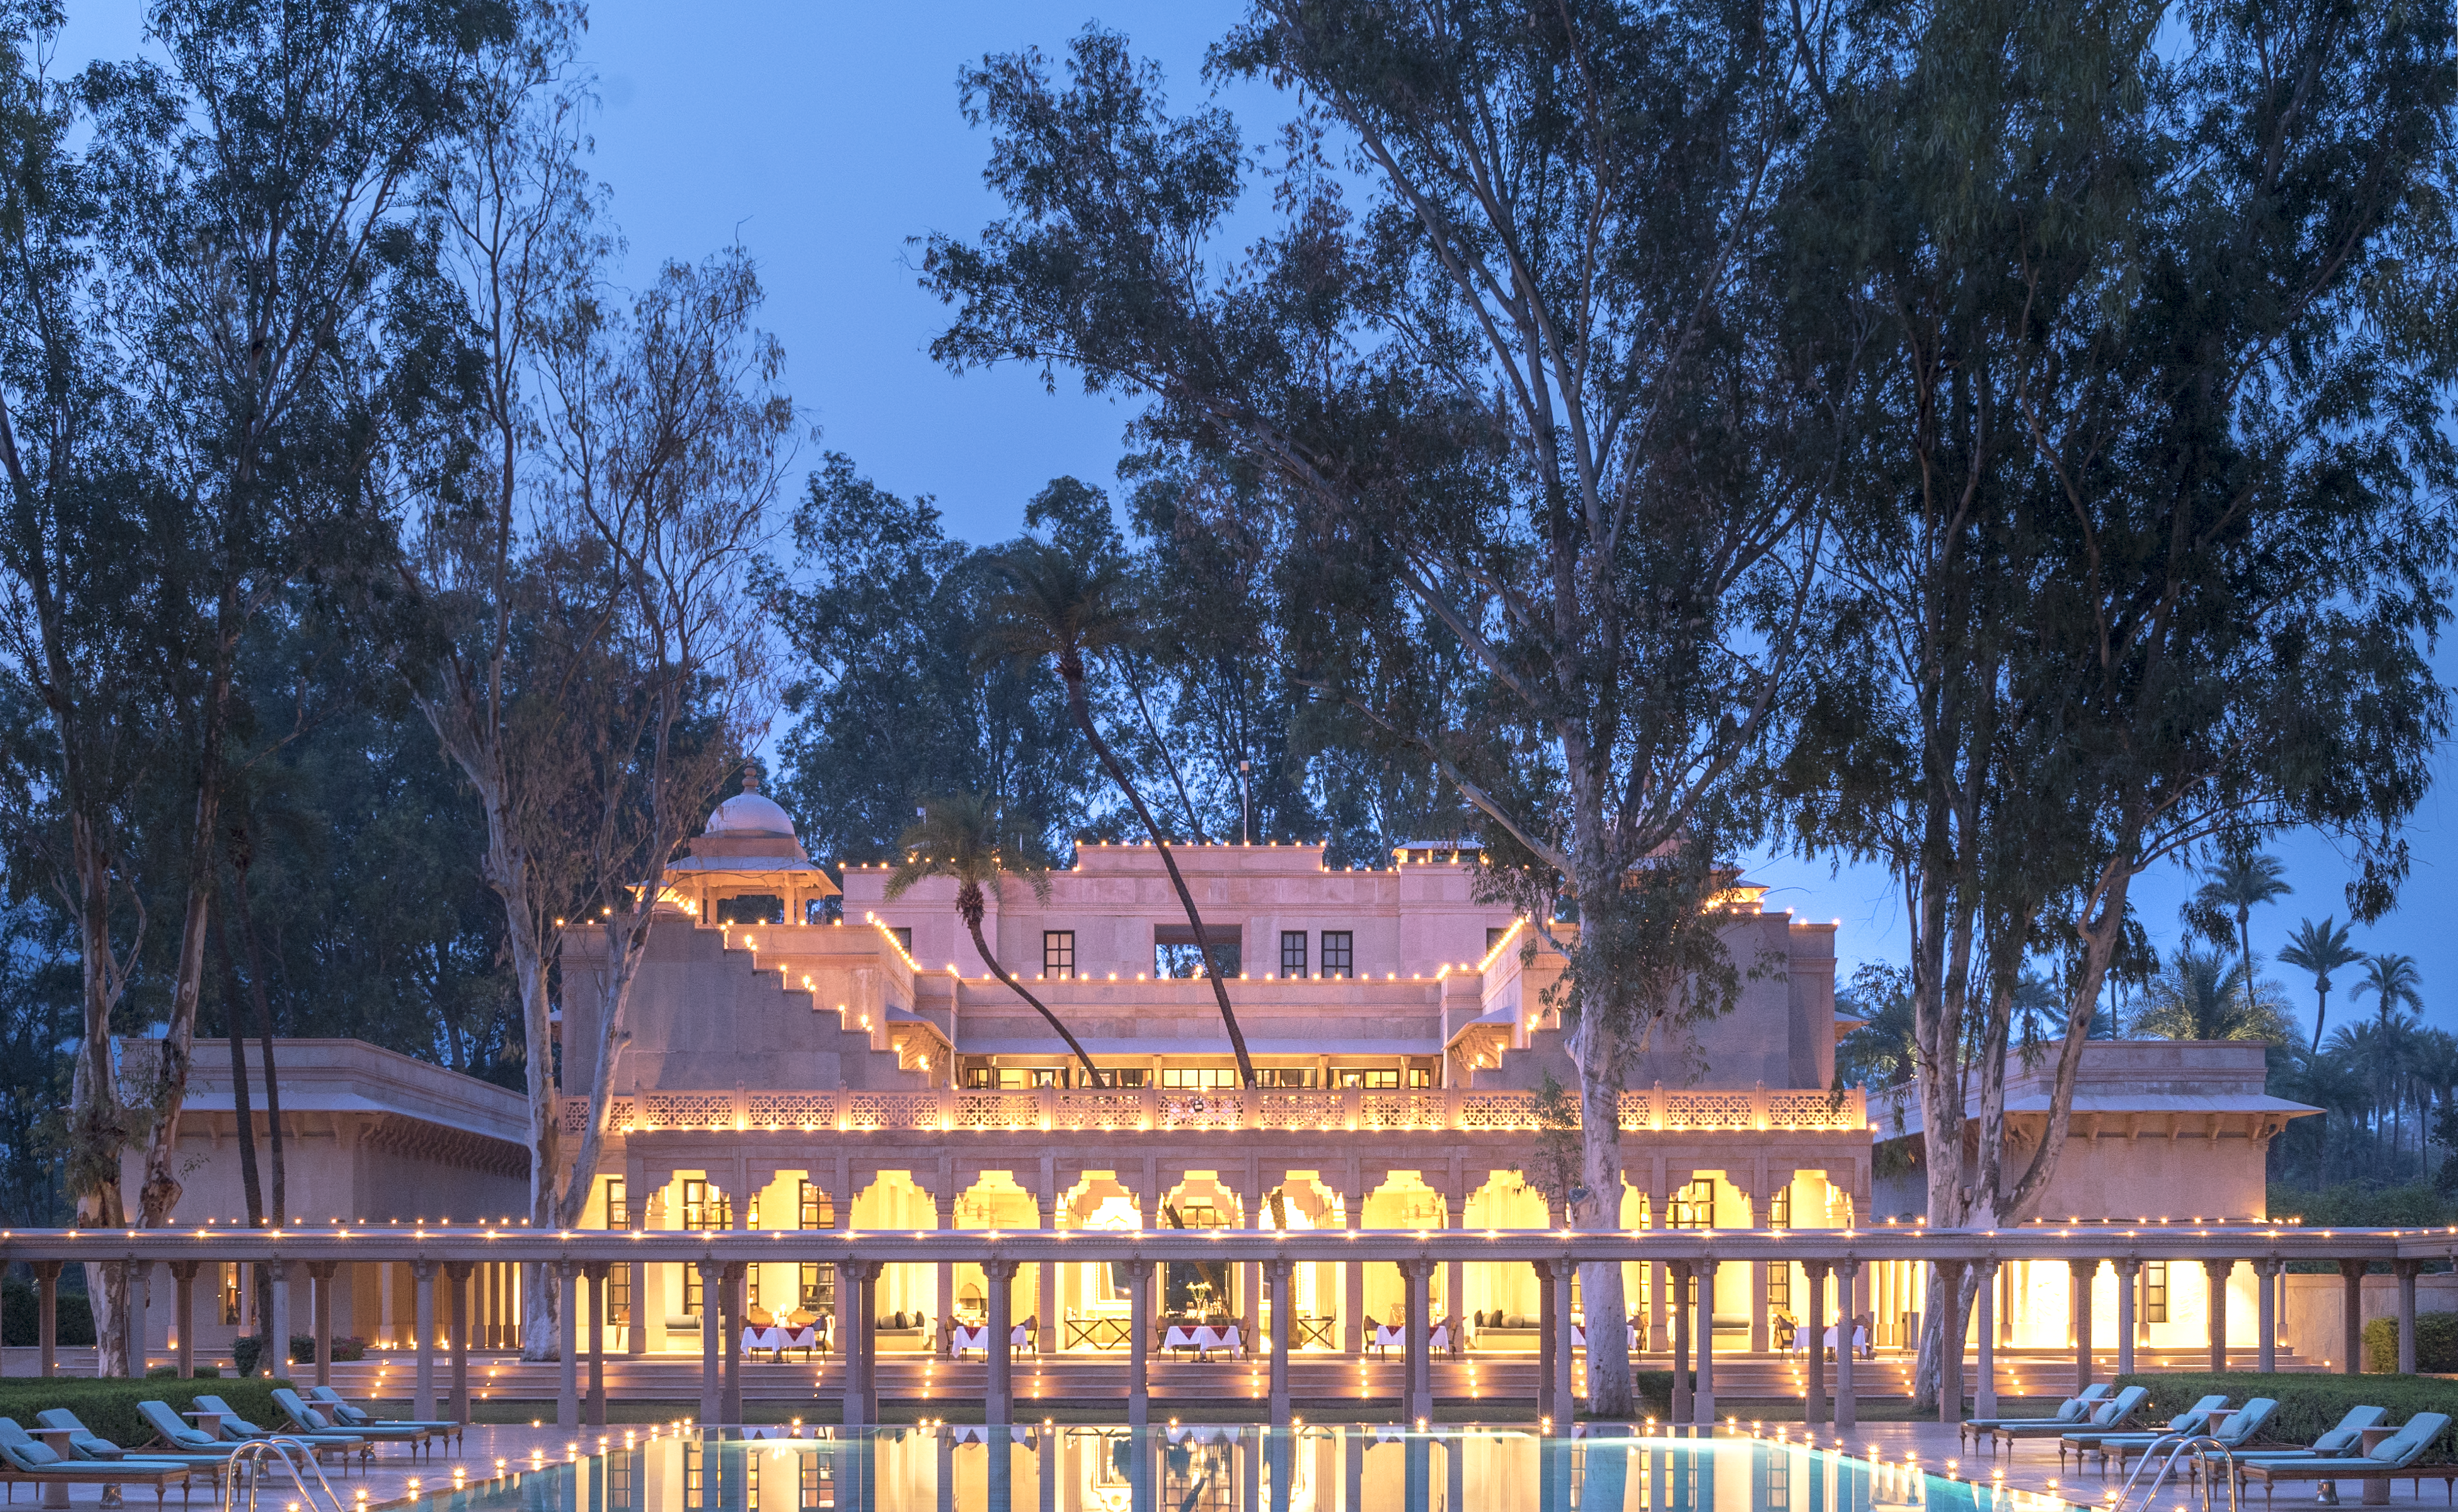 Calling the pool at Amanbagh “regal” feels like an understatement